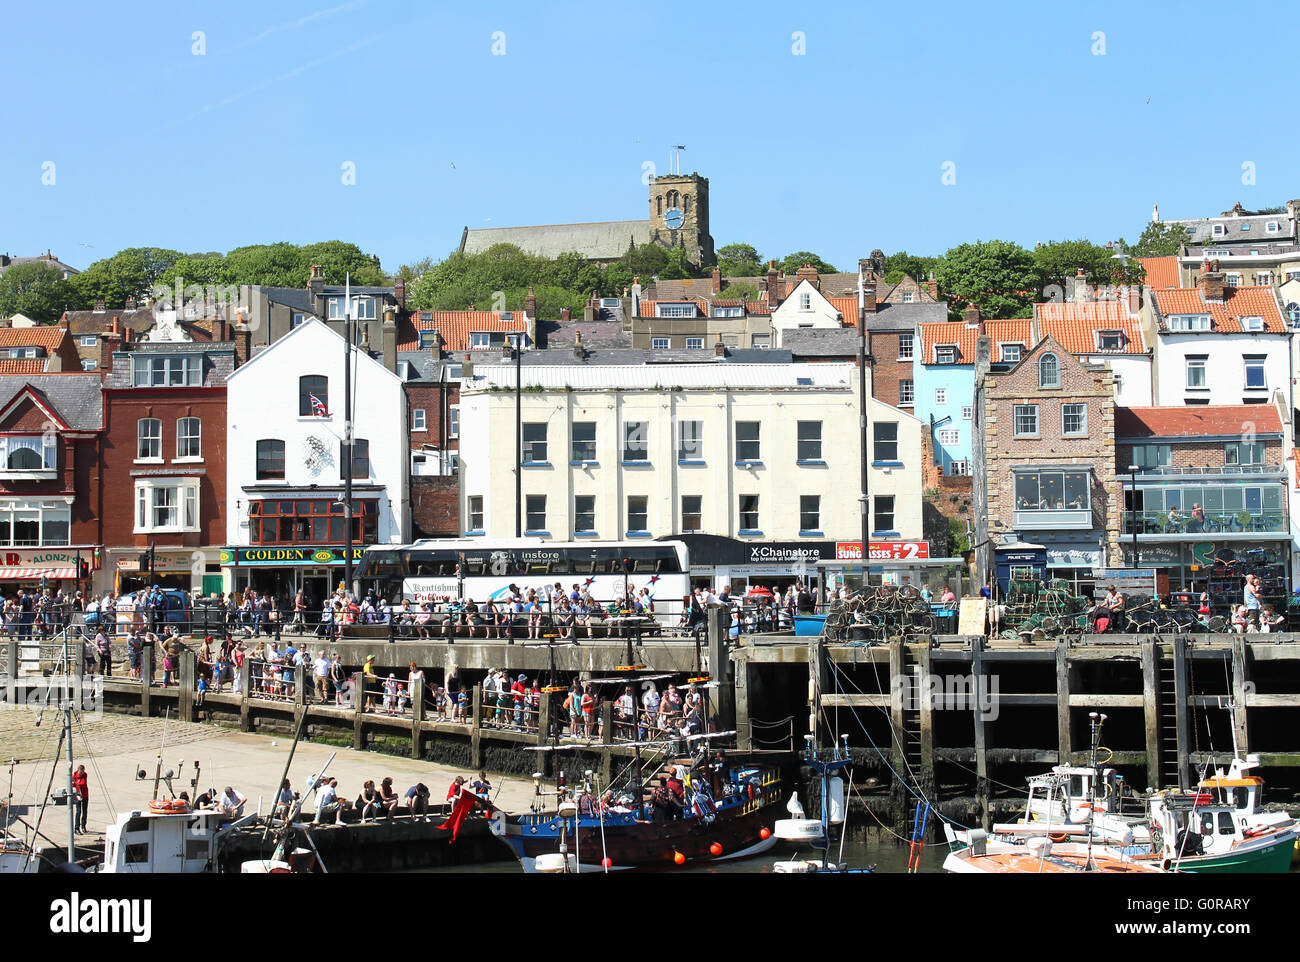 SOUTH BAY HARBOR, SCARBOROUGH, NORTH YORKSHIRE, ENGLAND - 19th of May 2014: Tourists enjoying a day out in the popular seaside Stock Photo